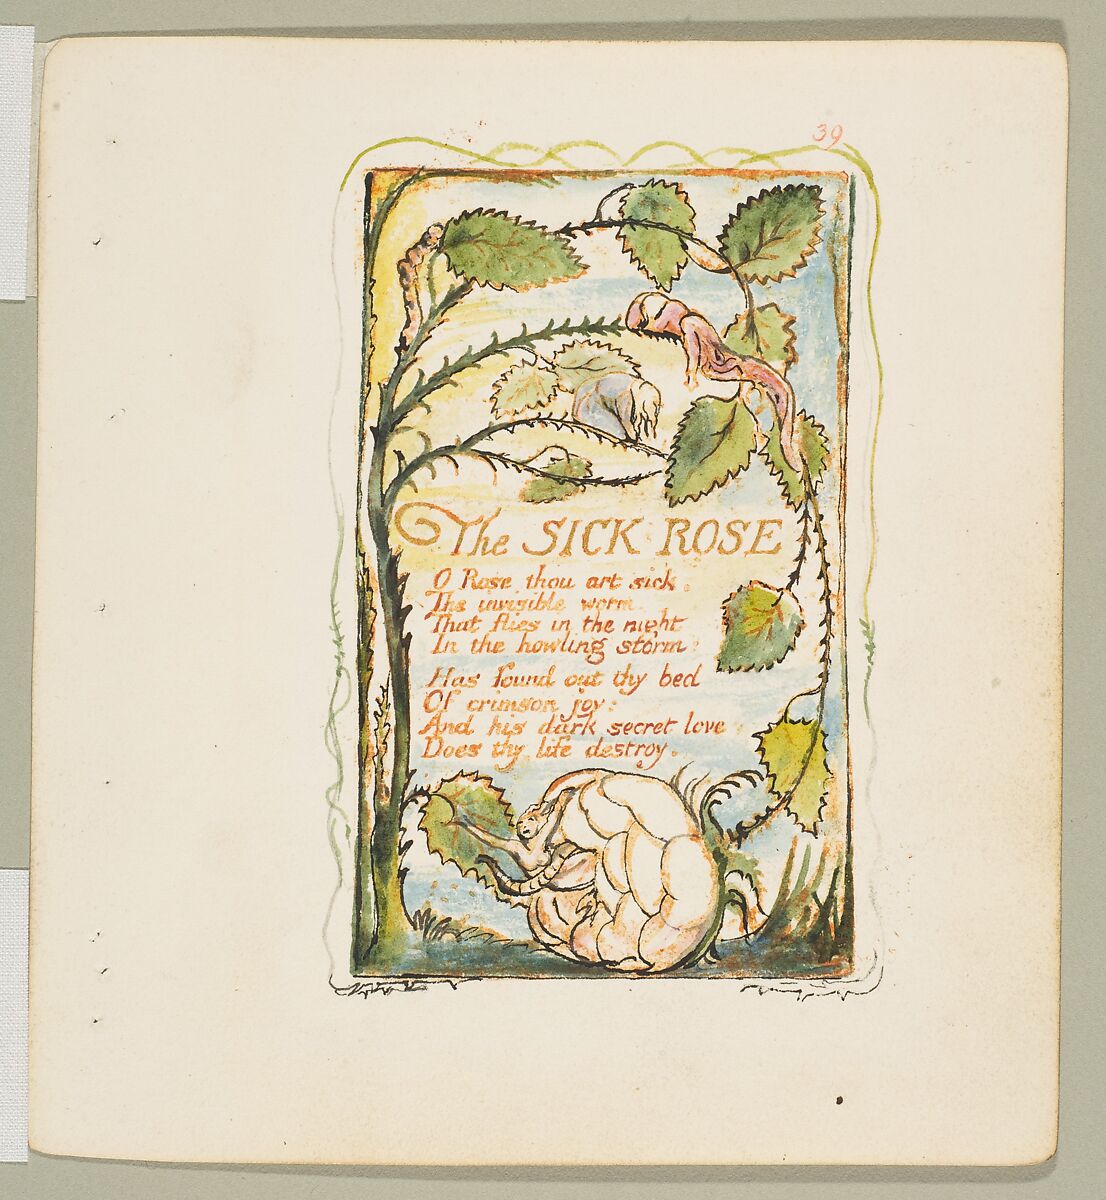 Songs of Experience: The Sick Rose, William Blake, Relief etching printed in orange-brown ink and hand-colored with watercolor and shell gold